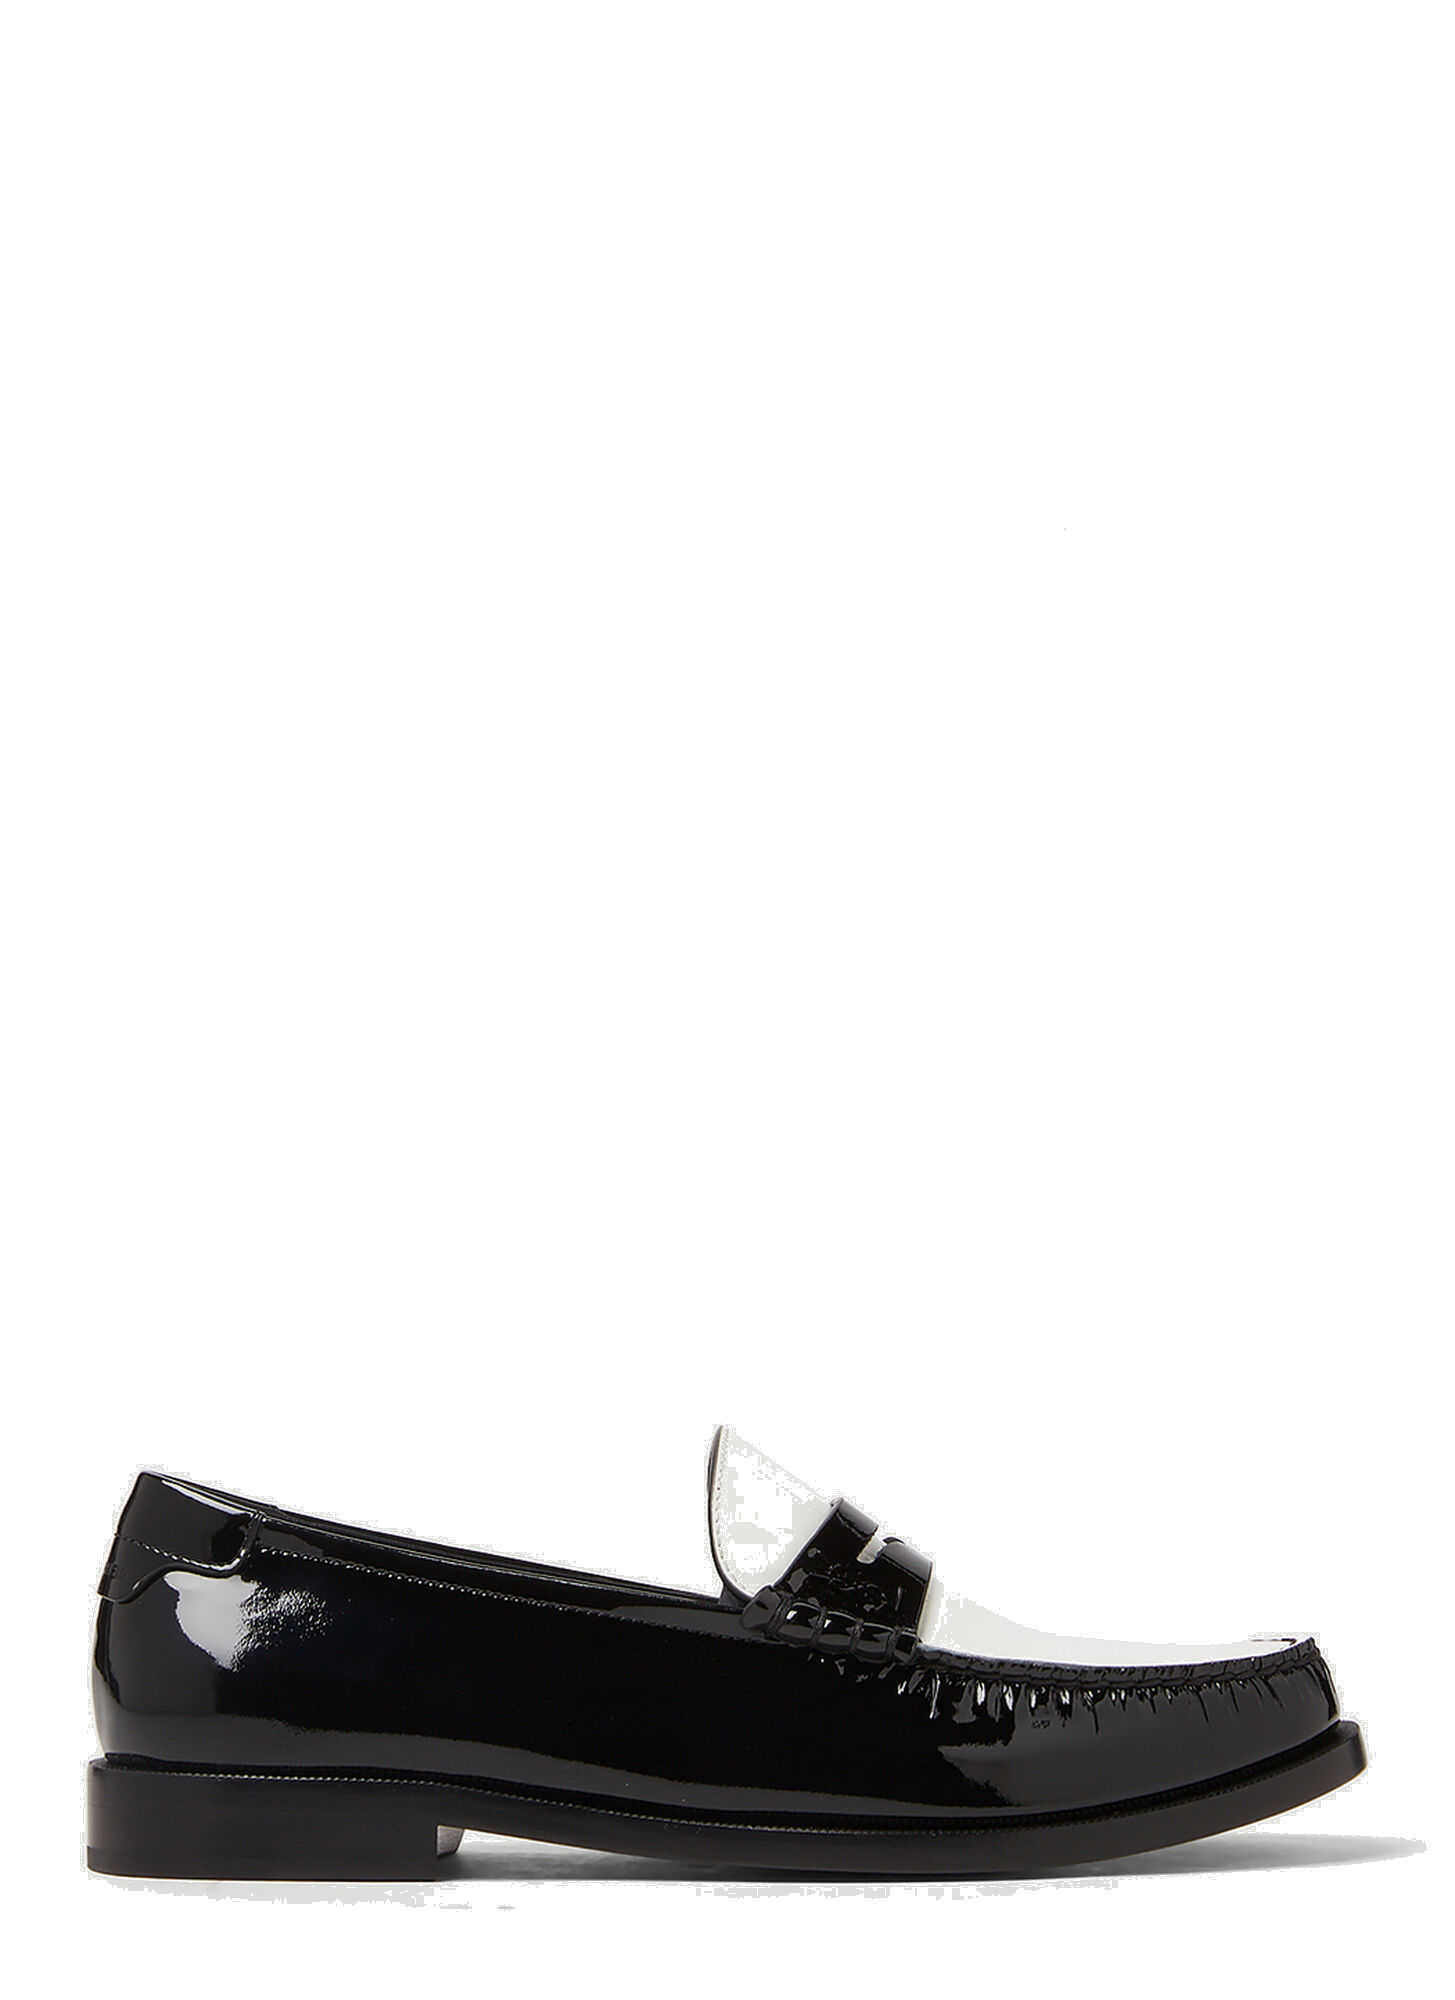 Photo: Colour Block Penny Loafers in Black